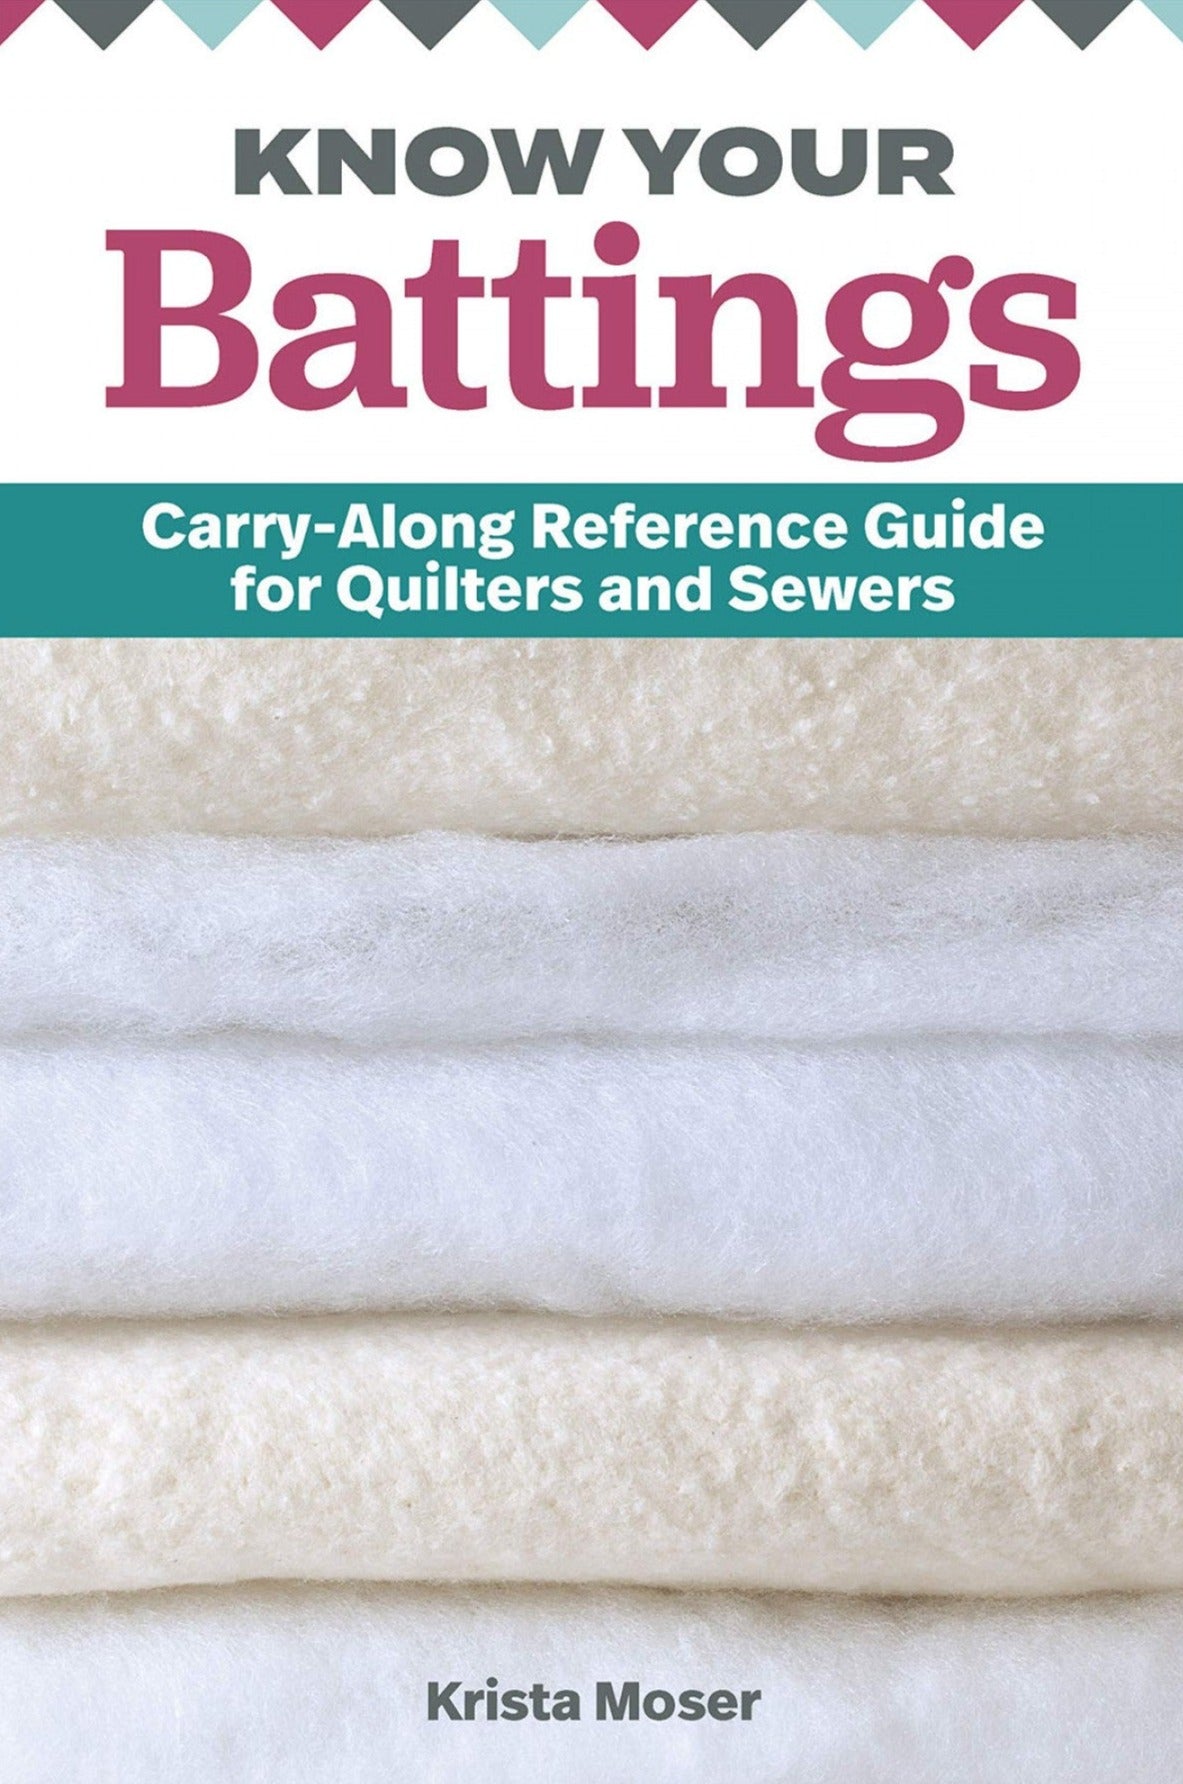 Pocket Guide | Know Your Battings